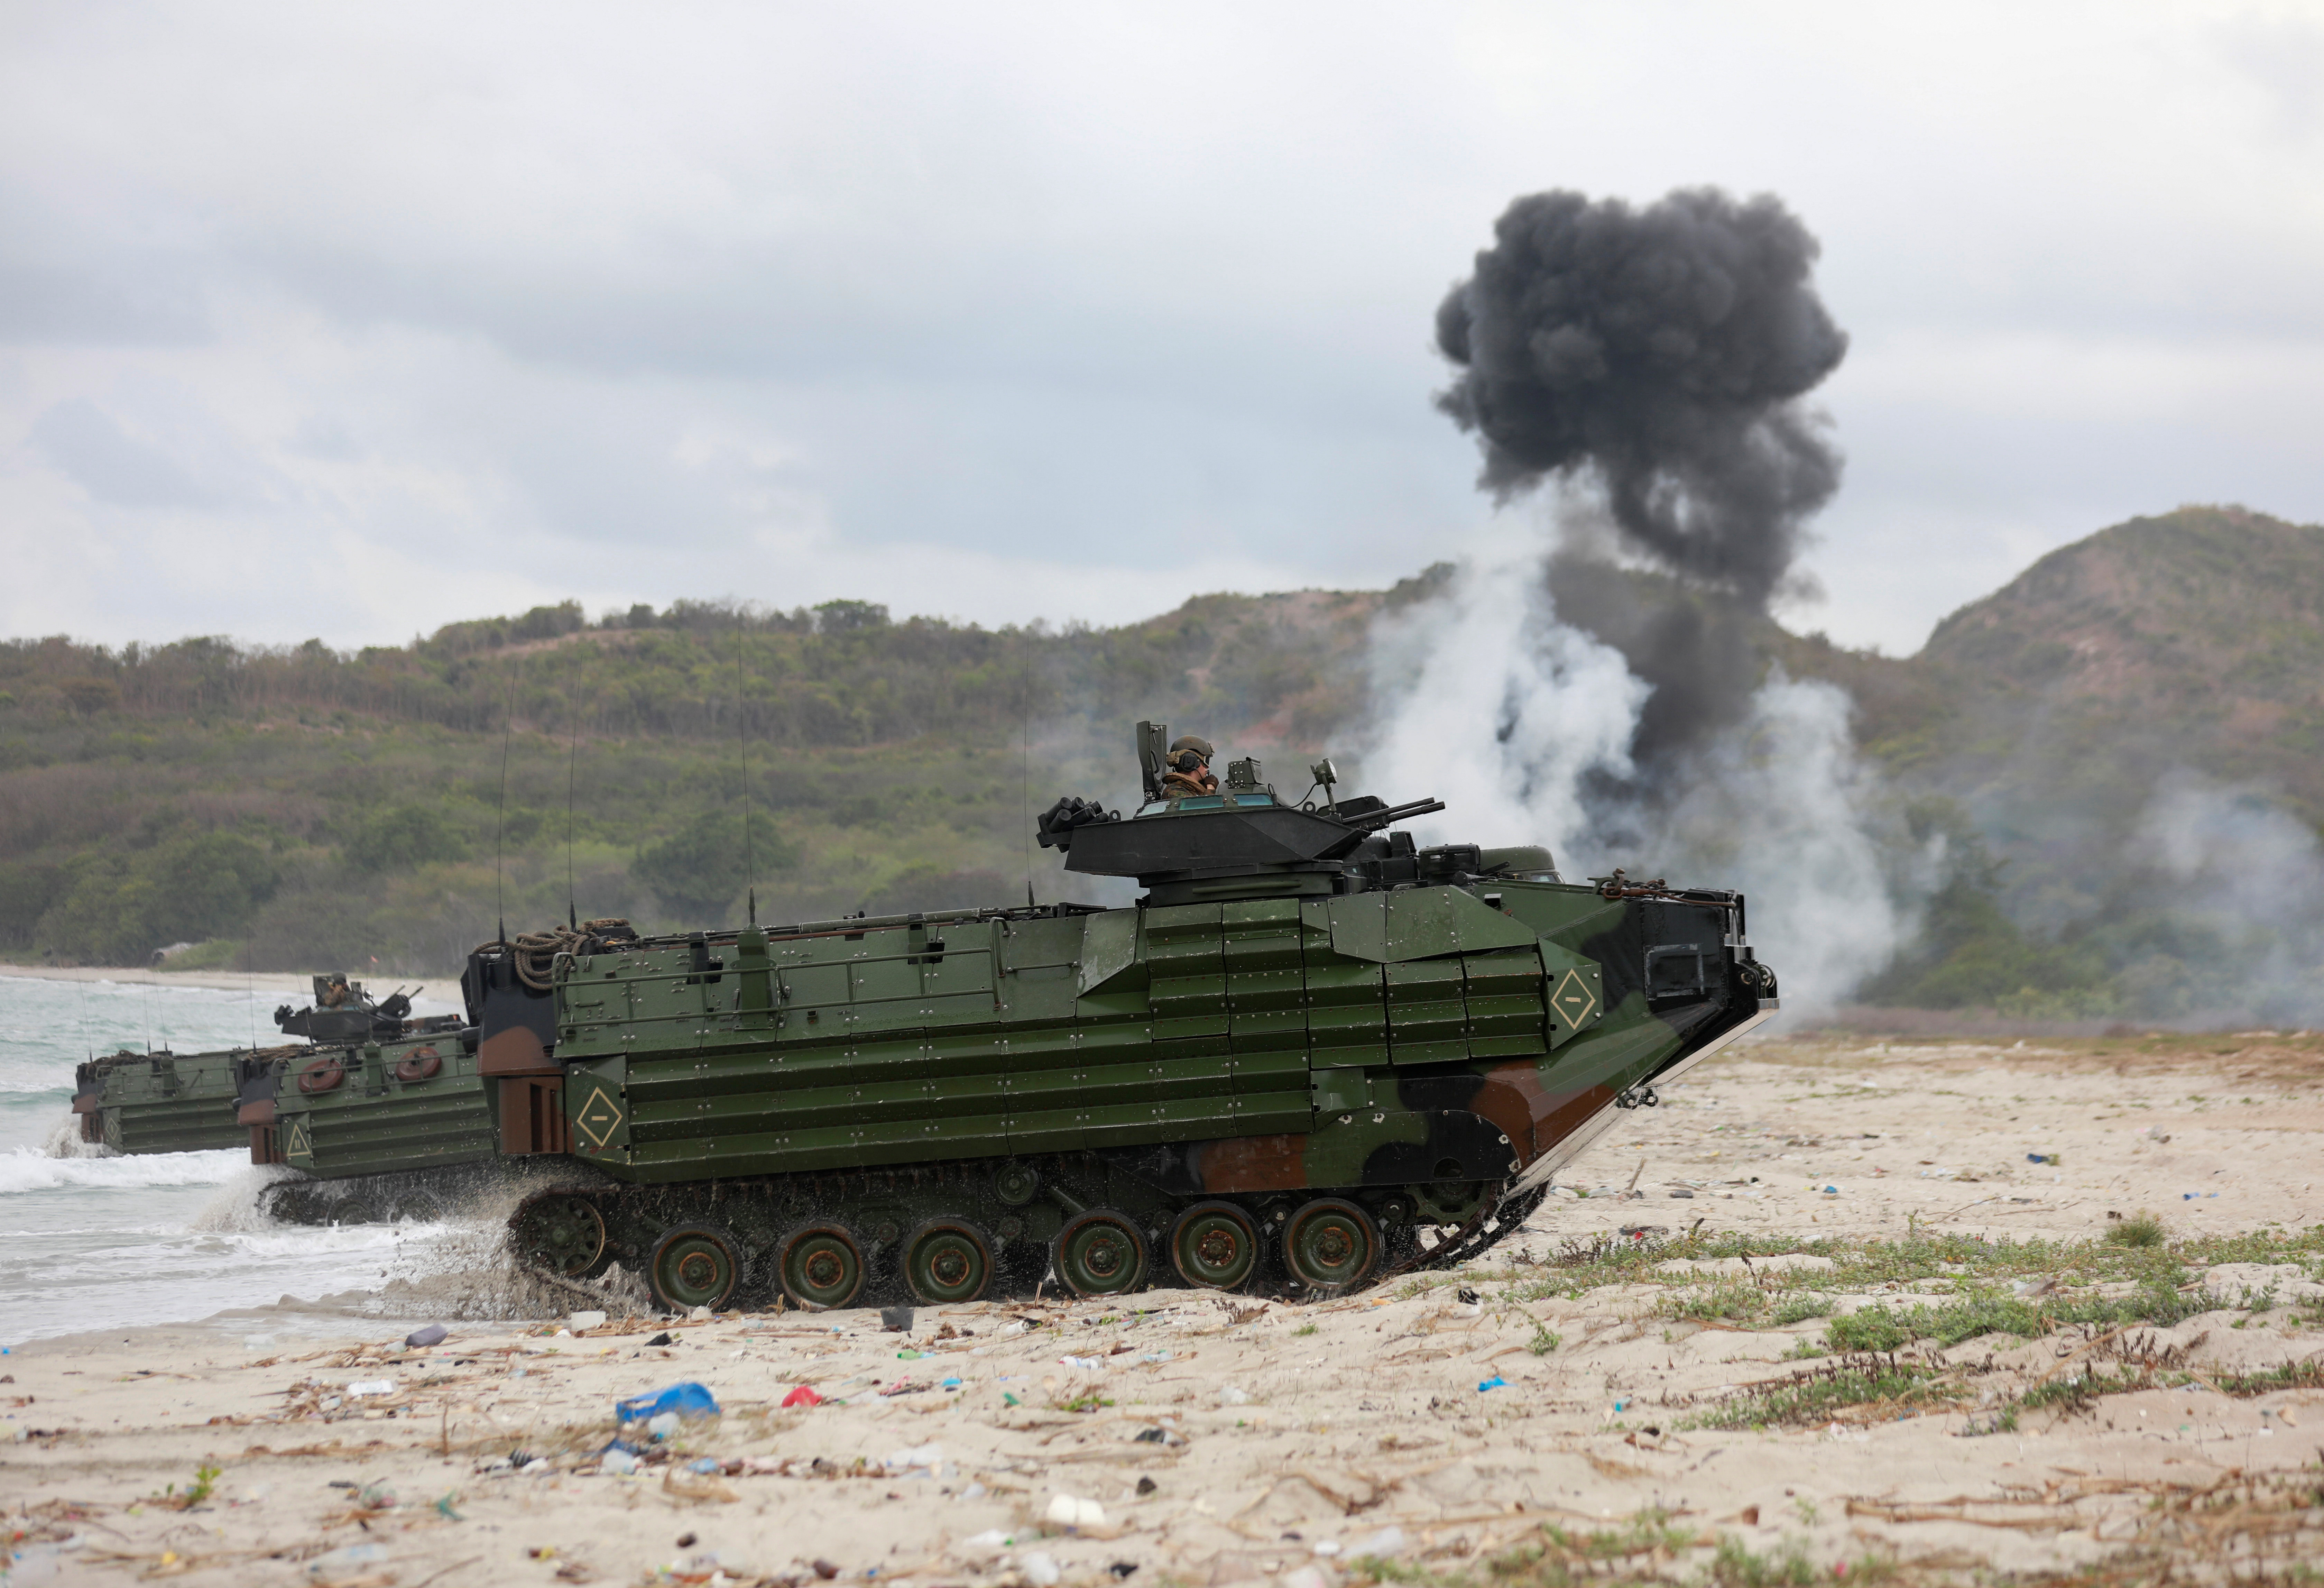 Tanks take part in the Amphibious Assault Demonstration during the Cobra Gold multilateral military exercise in Hat Yao Beach, Sattahip District, Chonburi Province